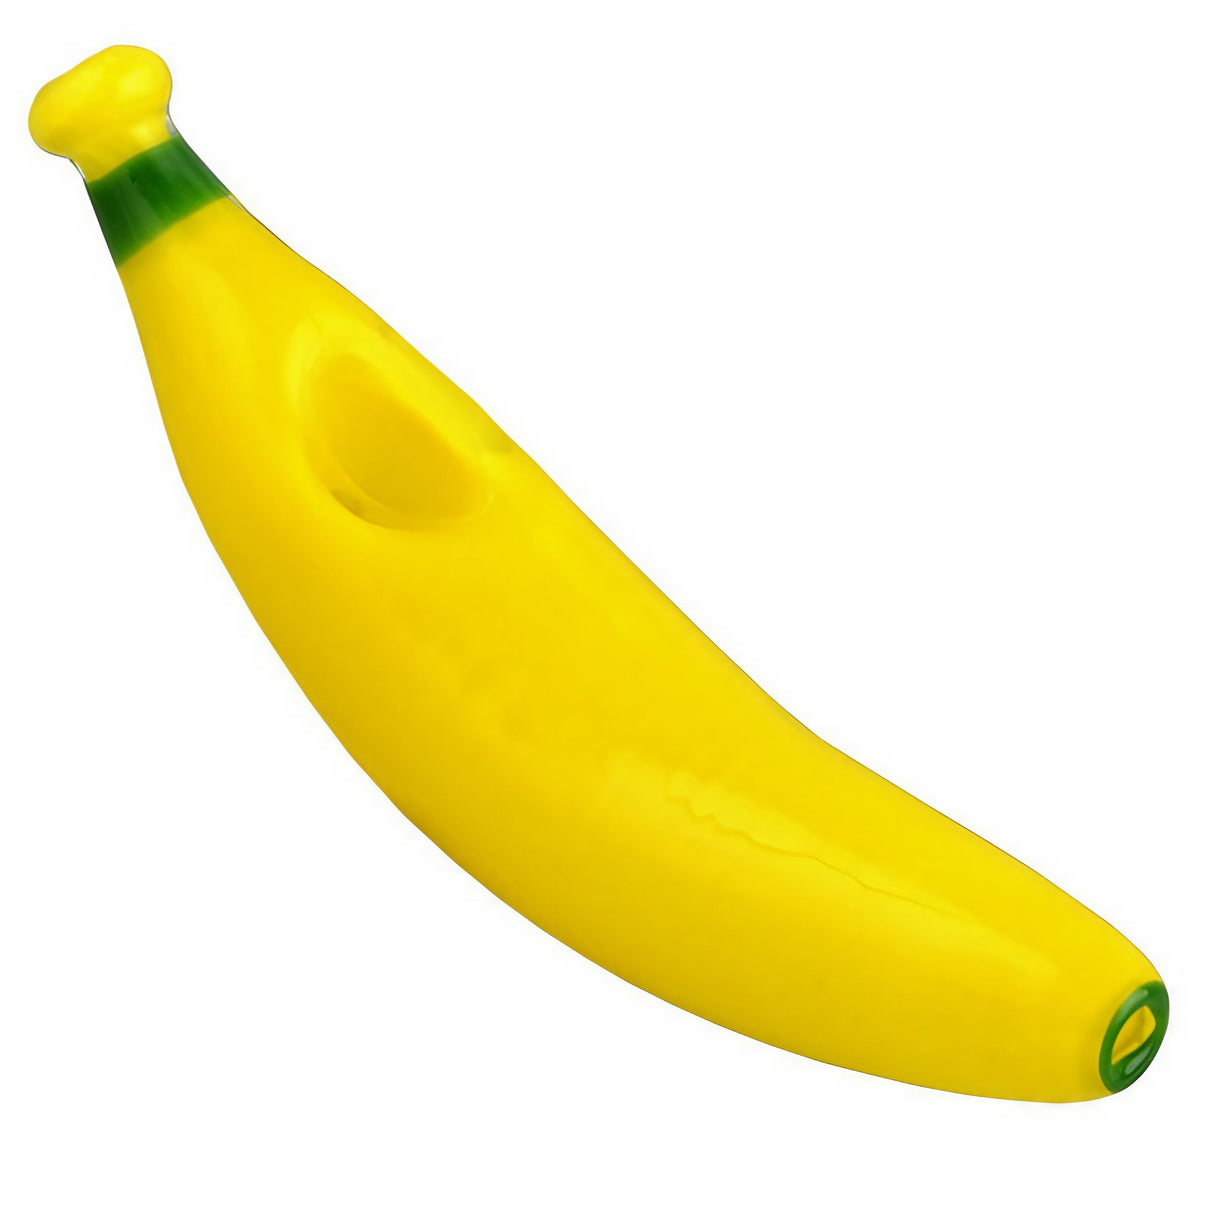 Banana Themed Spoon Pipe - Get Ripe with Heavy Wall Borosilicate Glass, Side View